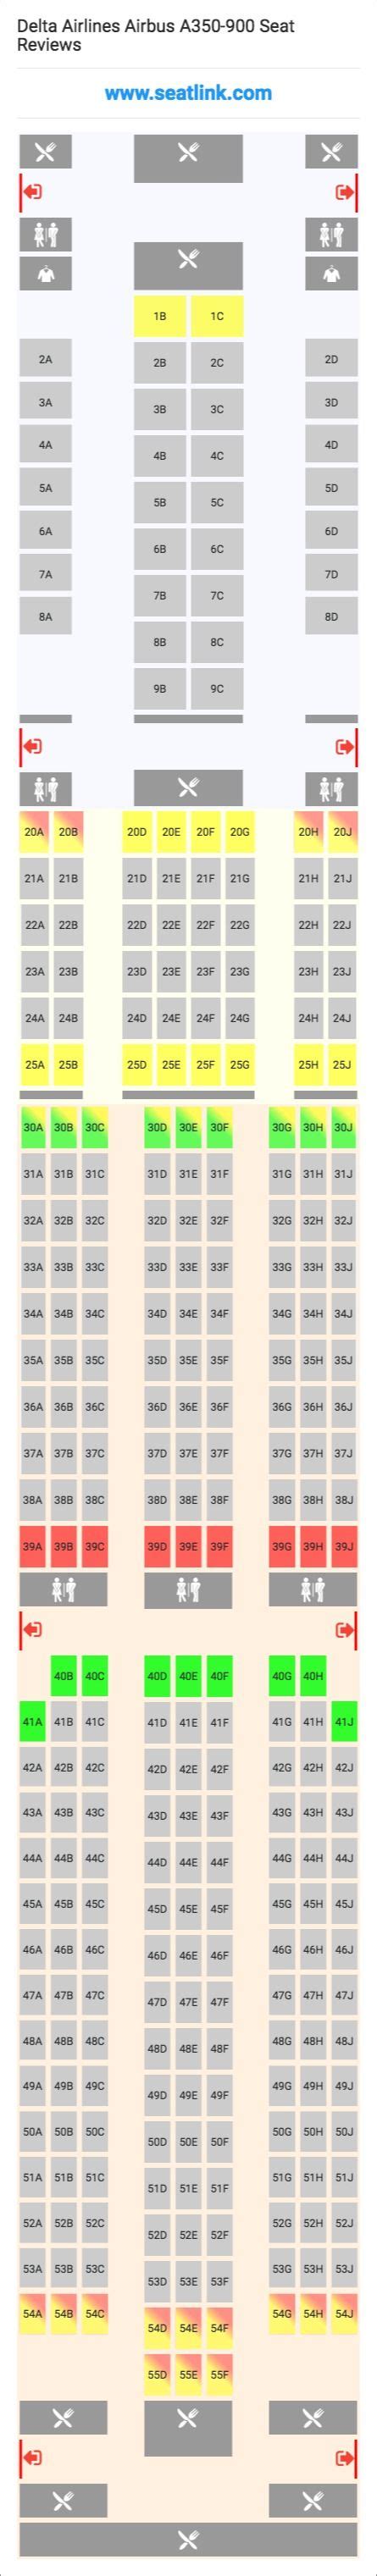 Delta Airlines Airbus A350 900 359 Seat Map Delta Airlines Airbus